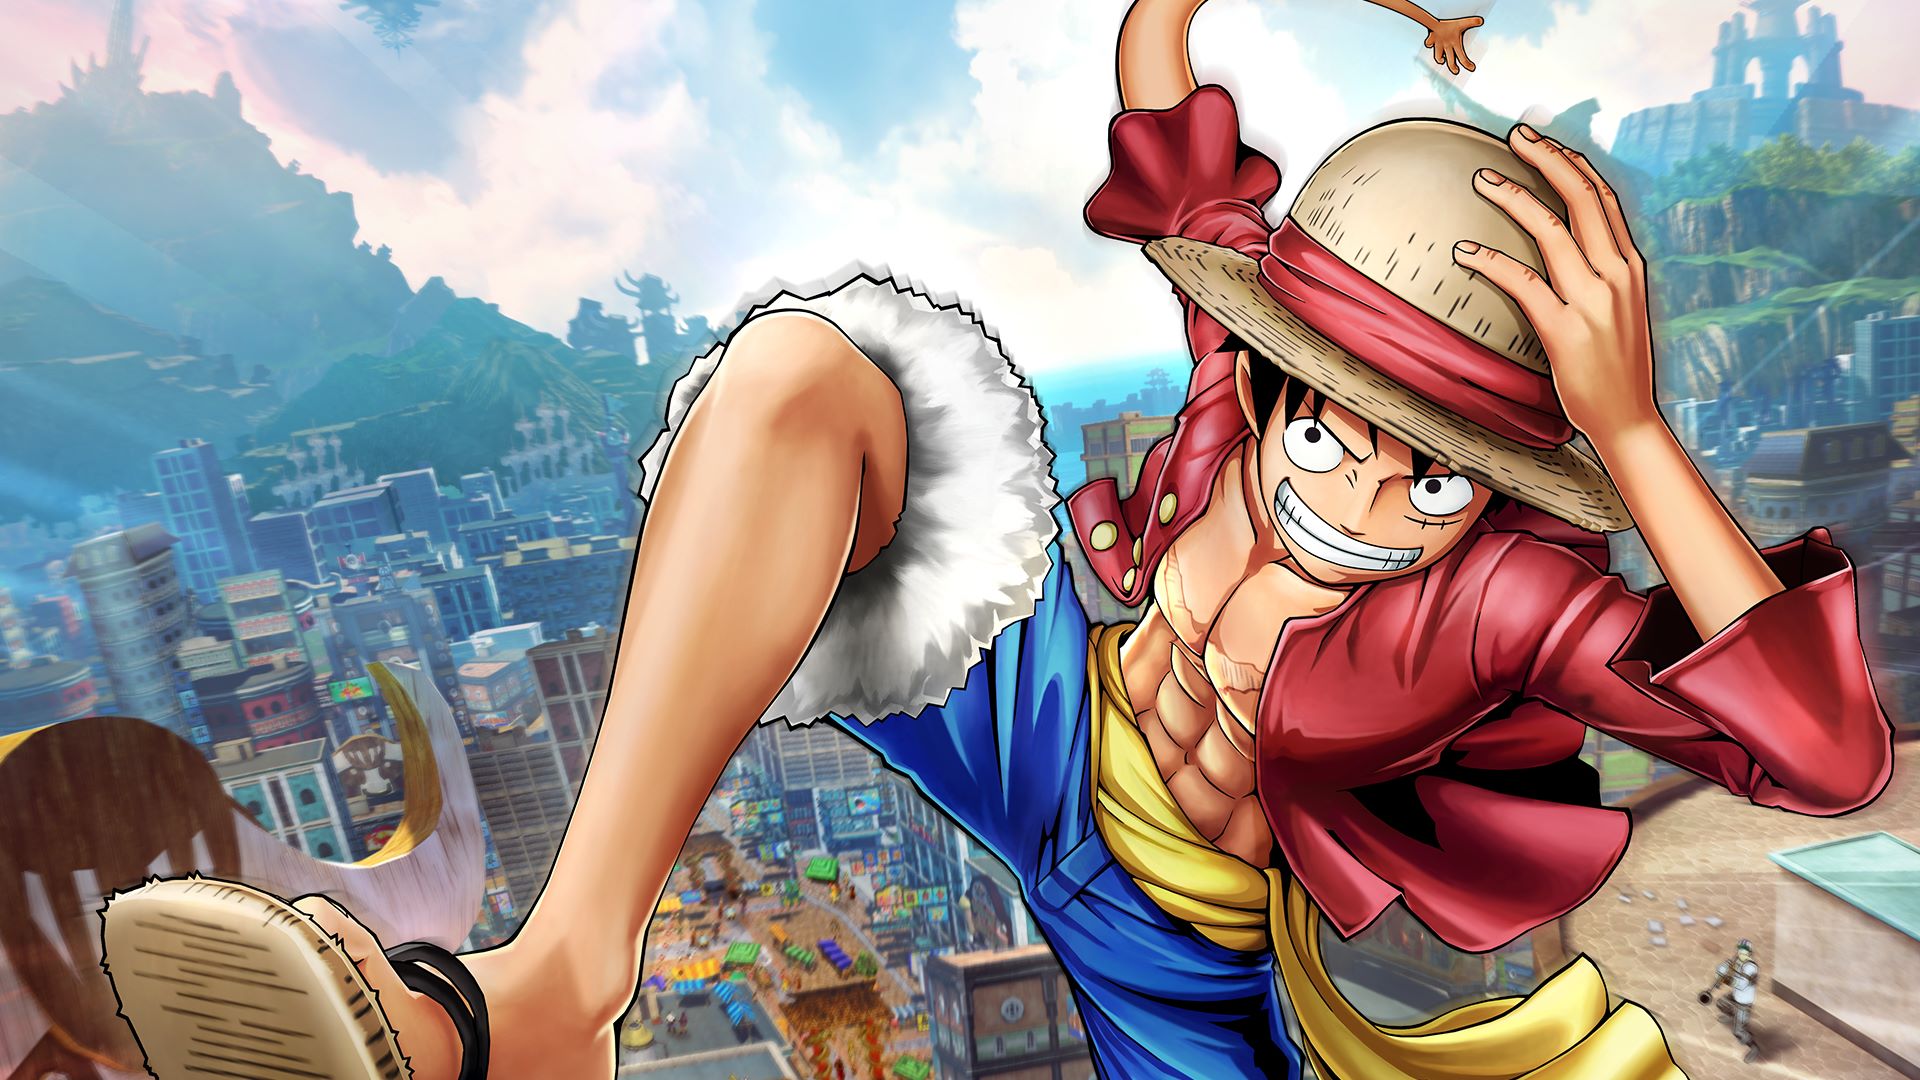 Hey everyone! I wanted to share a link to a Google Drive folder containing  all the One Piece wallpapers I've converted to 4k so far. If you're looking  for a new wallpaper.